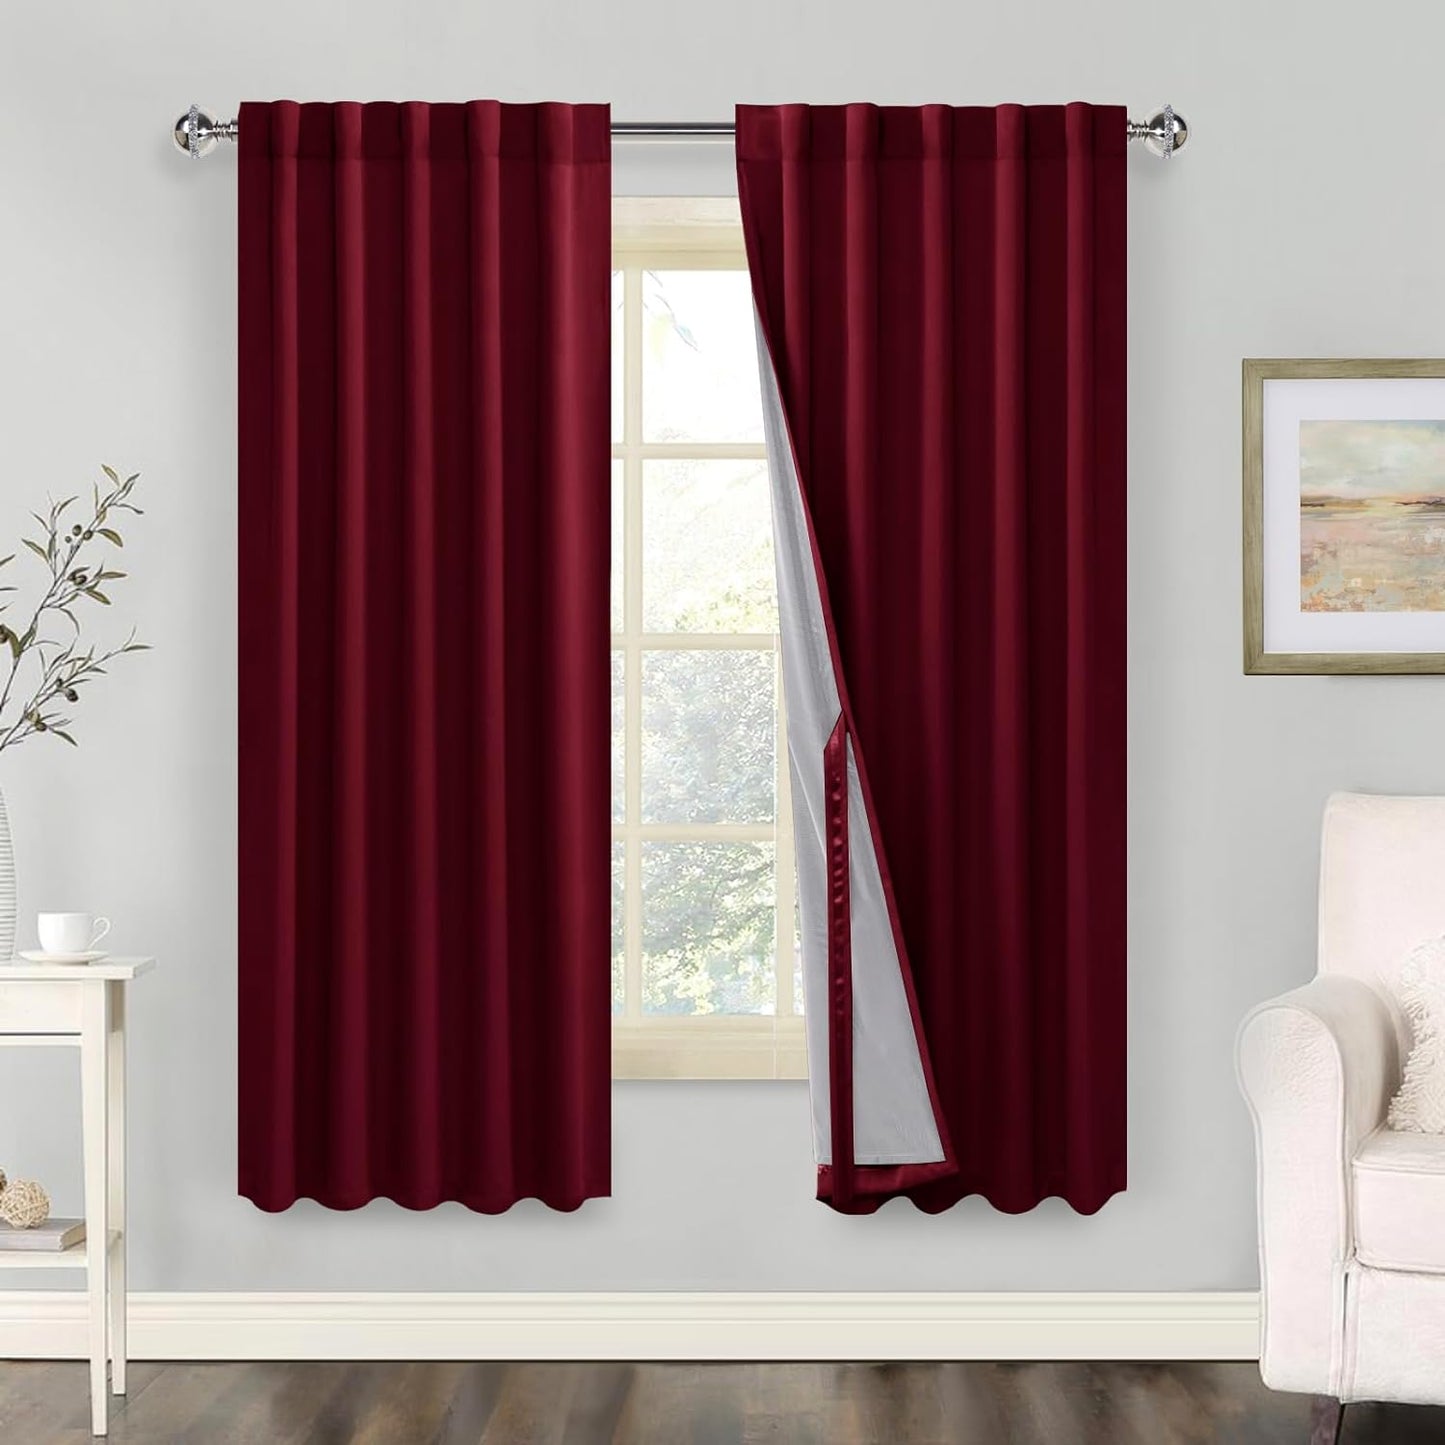 100% Blackout Curtains 2 Panels with Tiebacks- Heat and Full Light Blocking Window Treatment with Black Liner for Bedroom/Nursery, Rod Pocket & Back Tab，White, W52 X L84 Inches Long, Set of 2  XWZO Burgundy W42" X L63"|2 Panels 